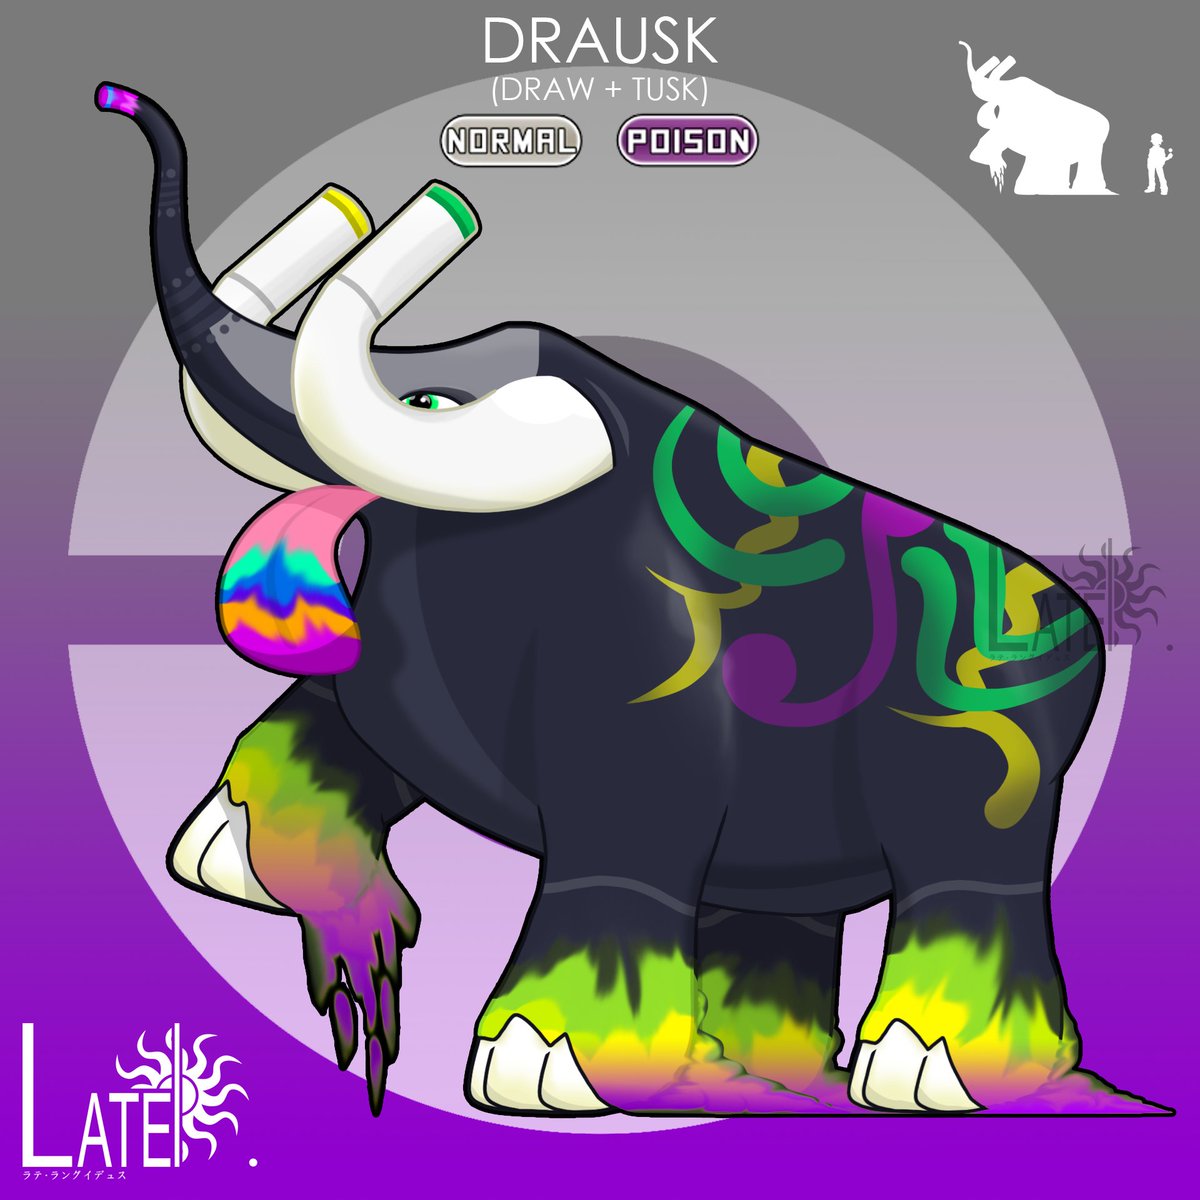 First attempt on making a fakemon

Drausk, The Spray Paint PKMN. 
From dawn 'till noon Drausk spends its time spray paint in anything it can draw on. This pkmn eats and licks color from plants and flower to refill the the paint in it's tube tusk-like horns.
#pokemonart #pokemon